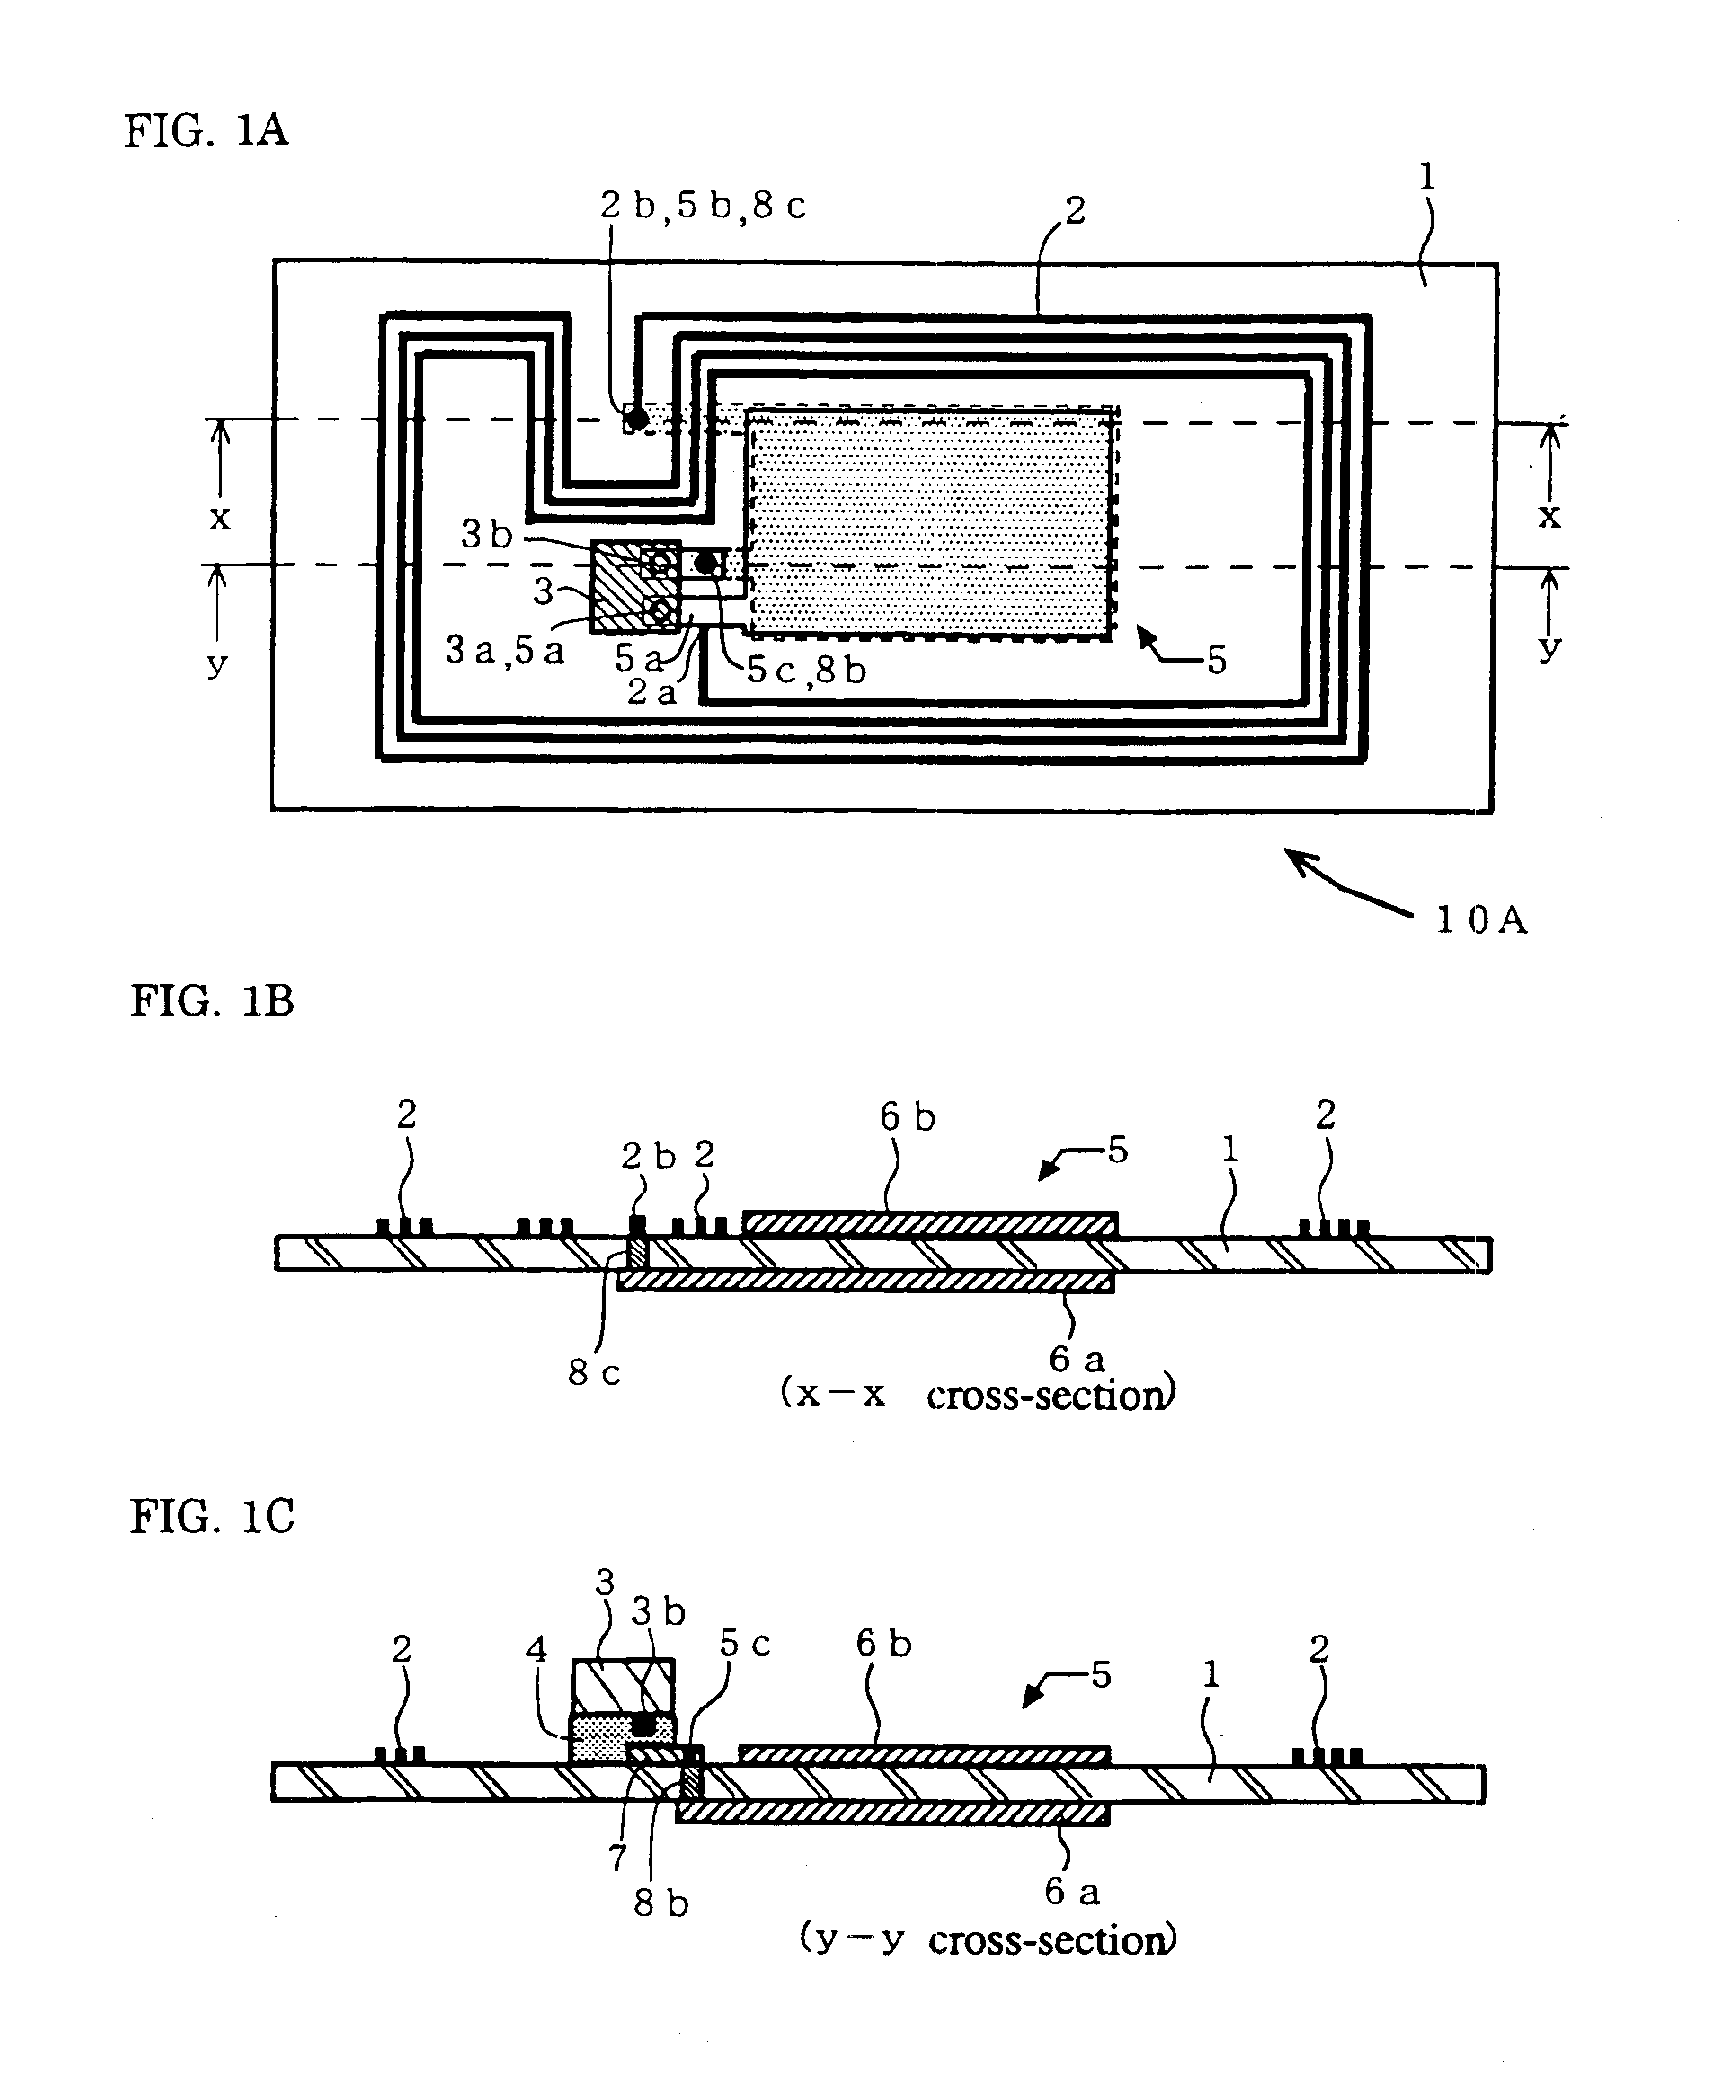 IC card having a mica film for stable resonance frequency and enhanced antenna properties